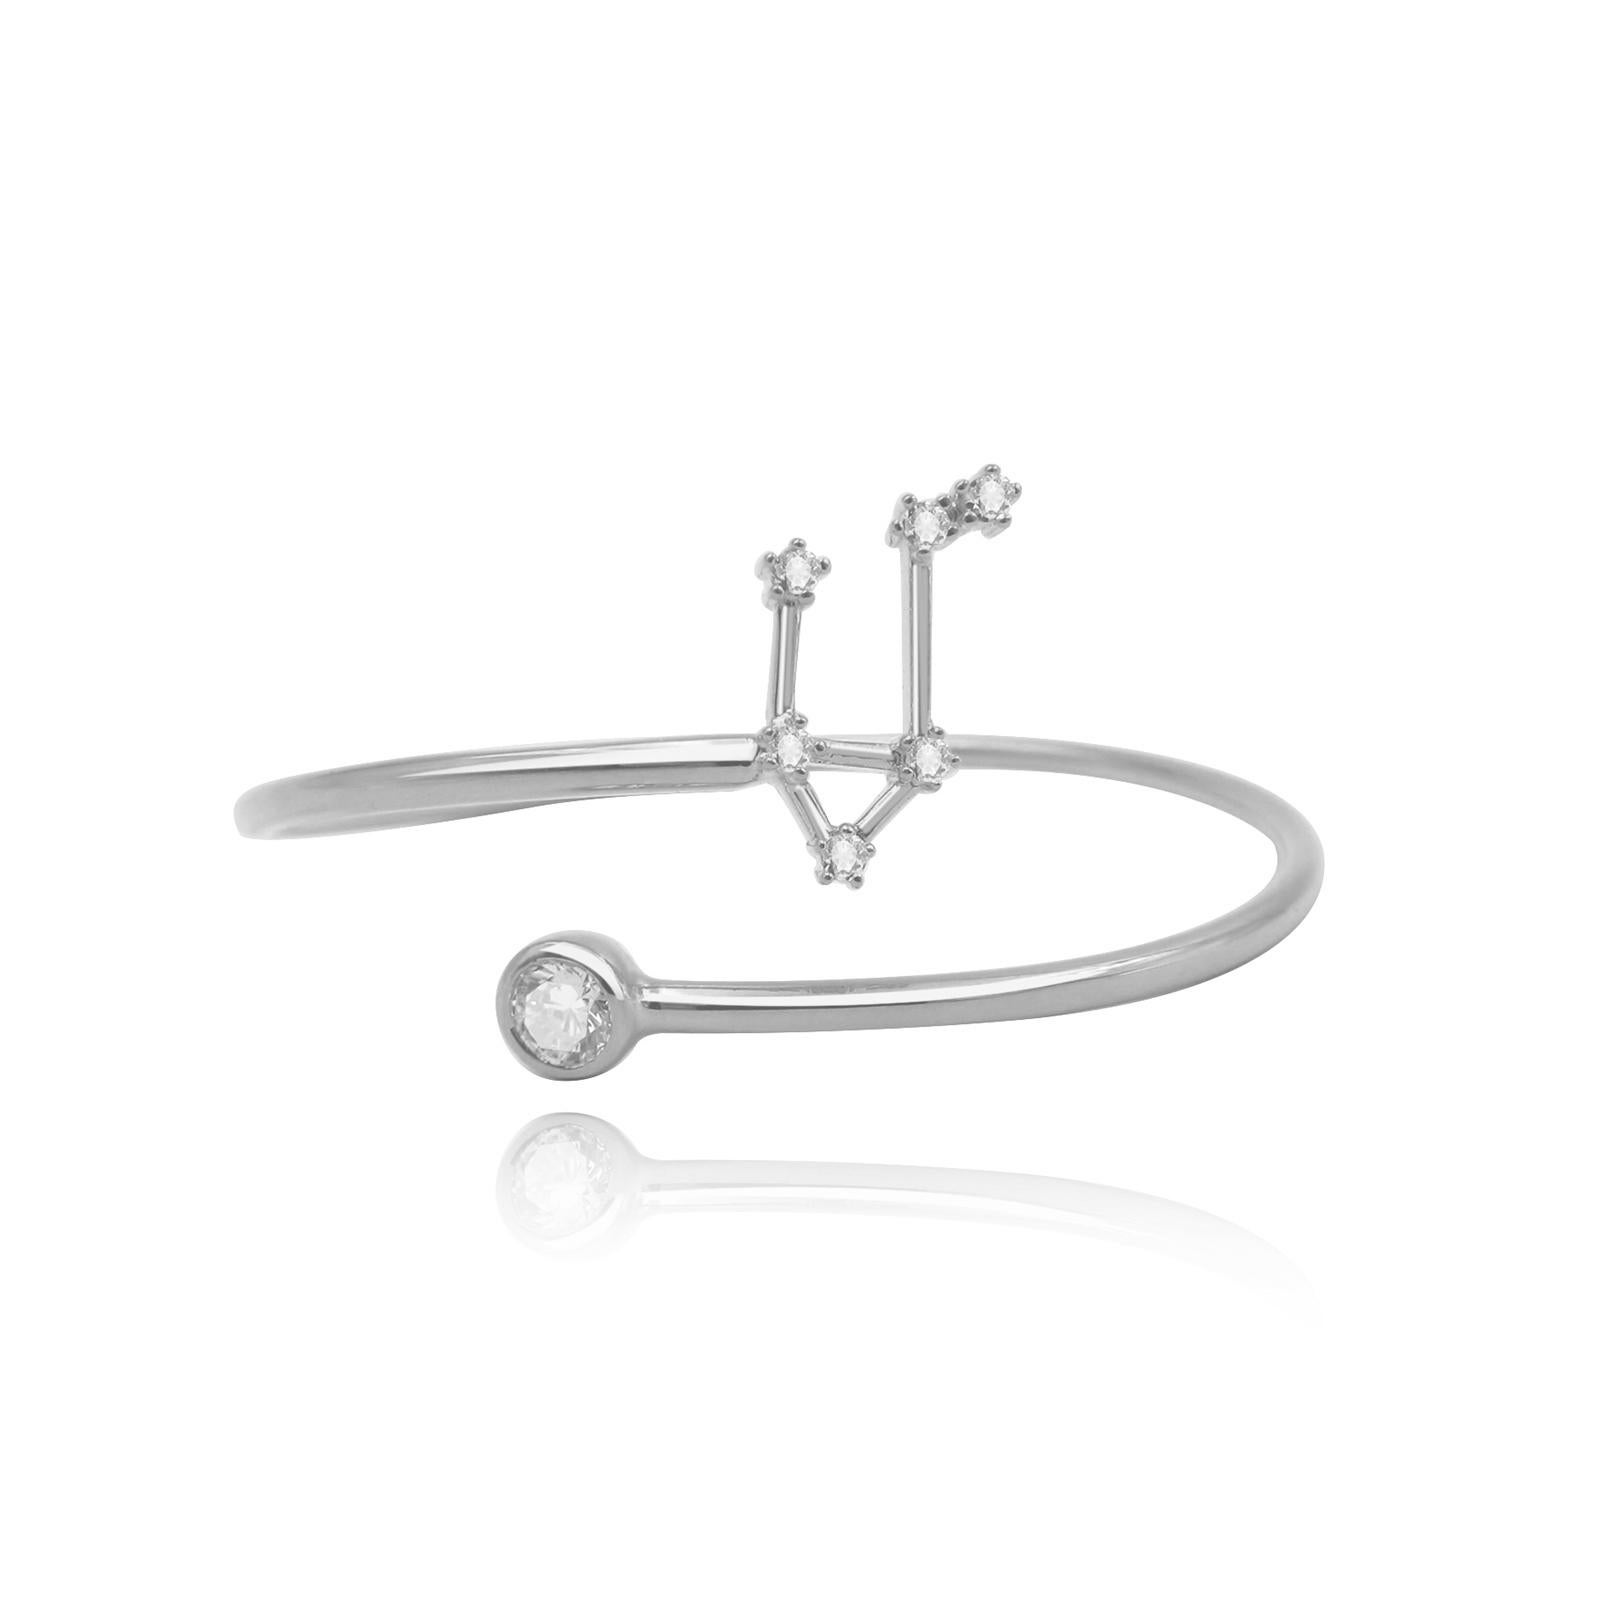 You are unique and your zodiac tells part of your story.  How your zodiac is displayed in the beautiful nighttime sky is what we want you to carry with you always. This libra constellation wire bezel cuff shares a part of your personality with us